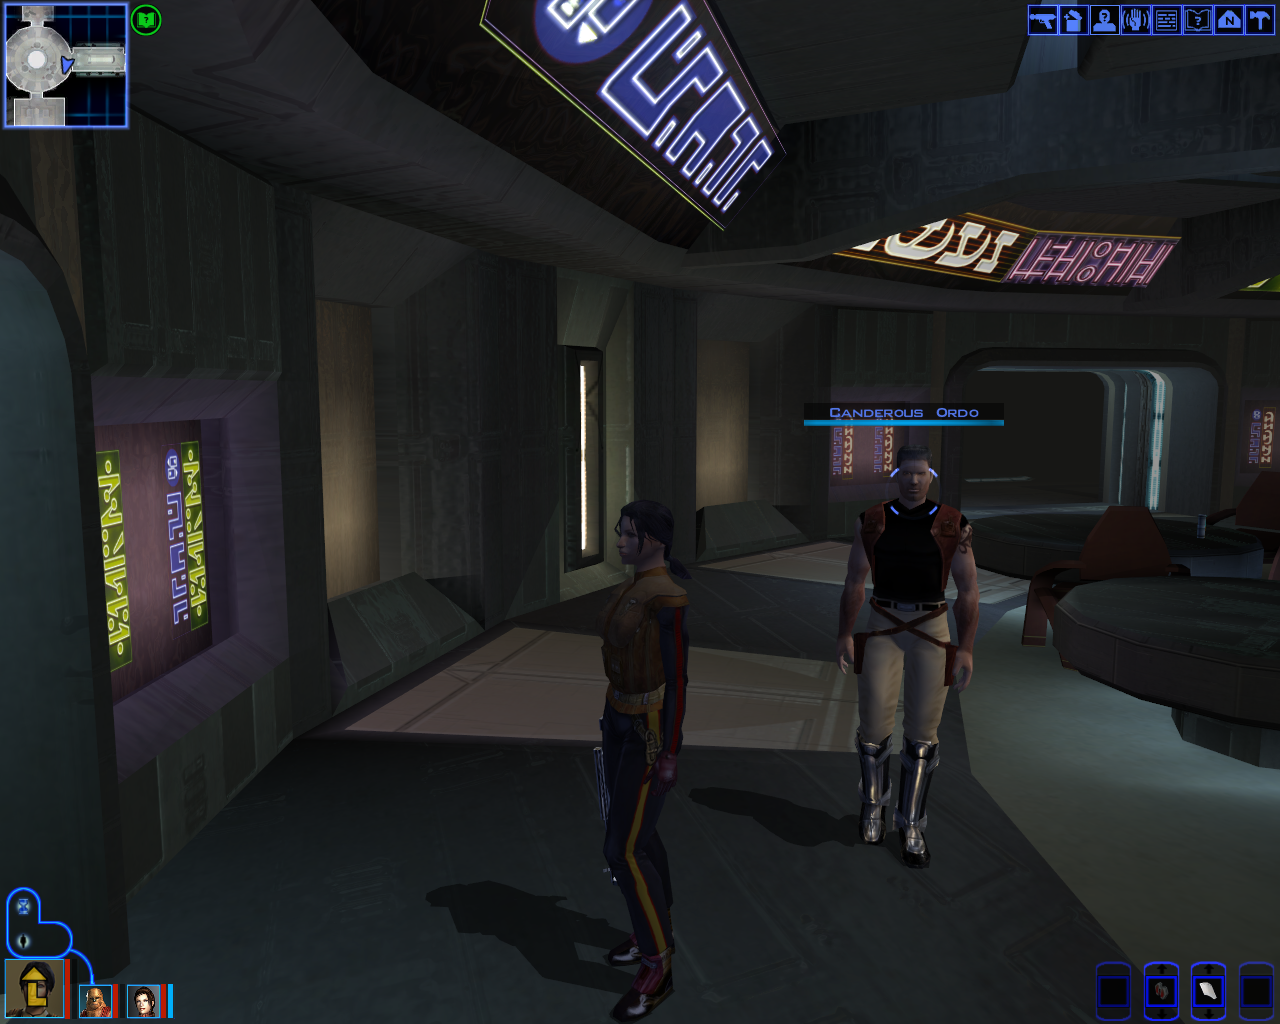 Canderous Ordo in Upper City Cantina